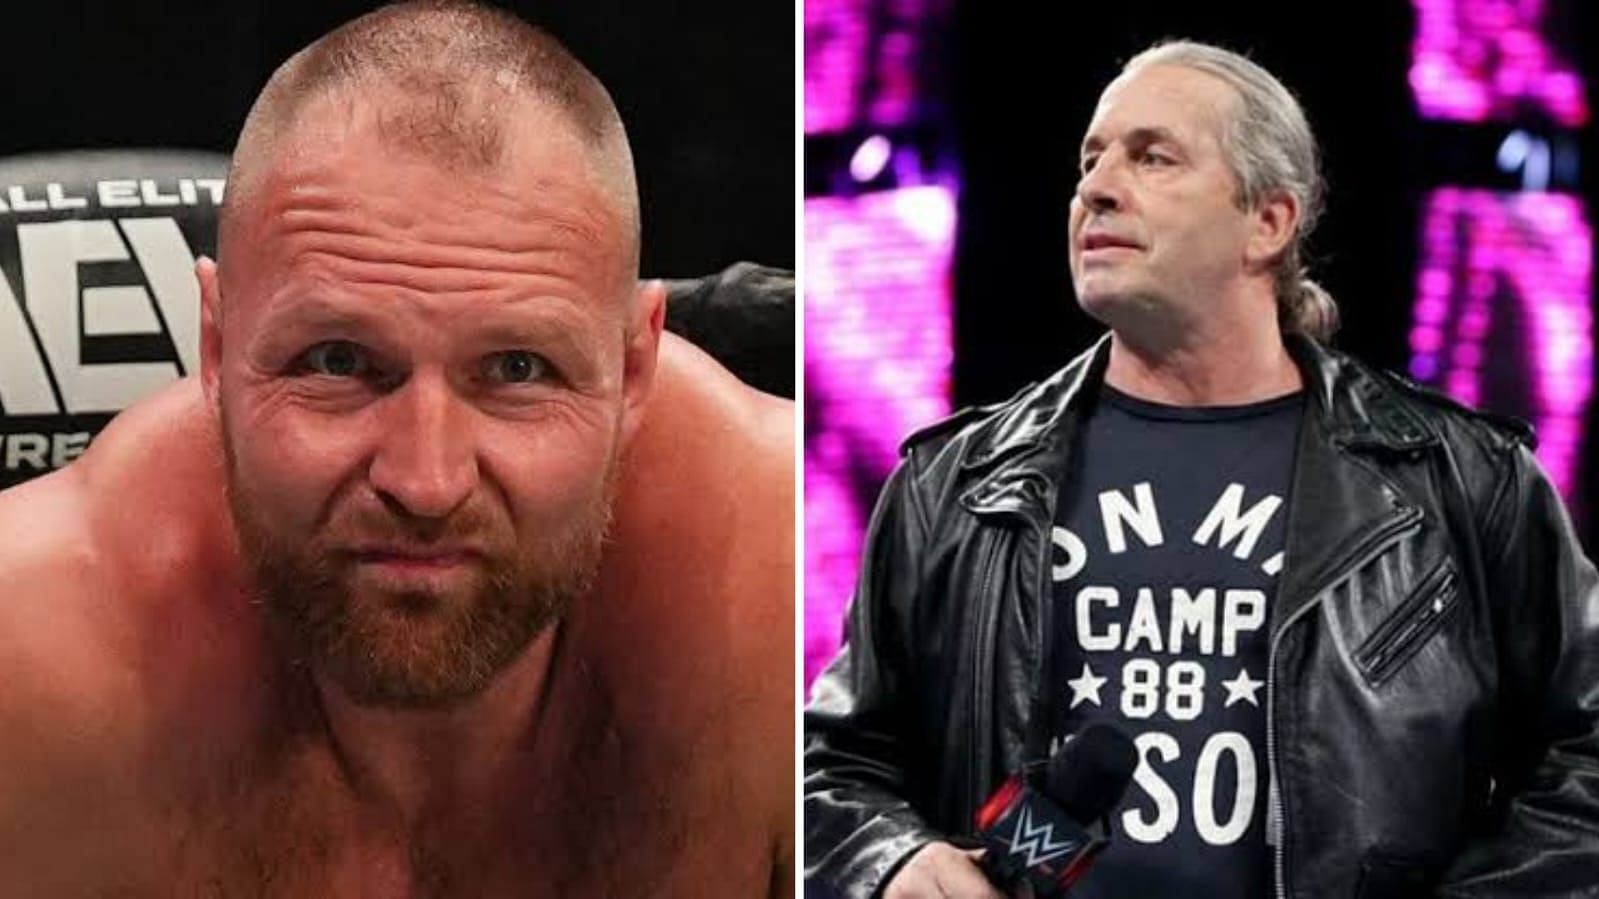 Bret Hart had some harsh words for Jon Moxley recently.